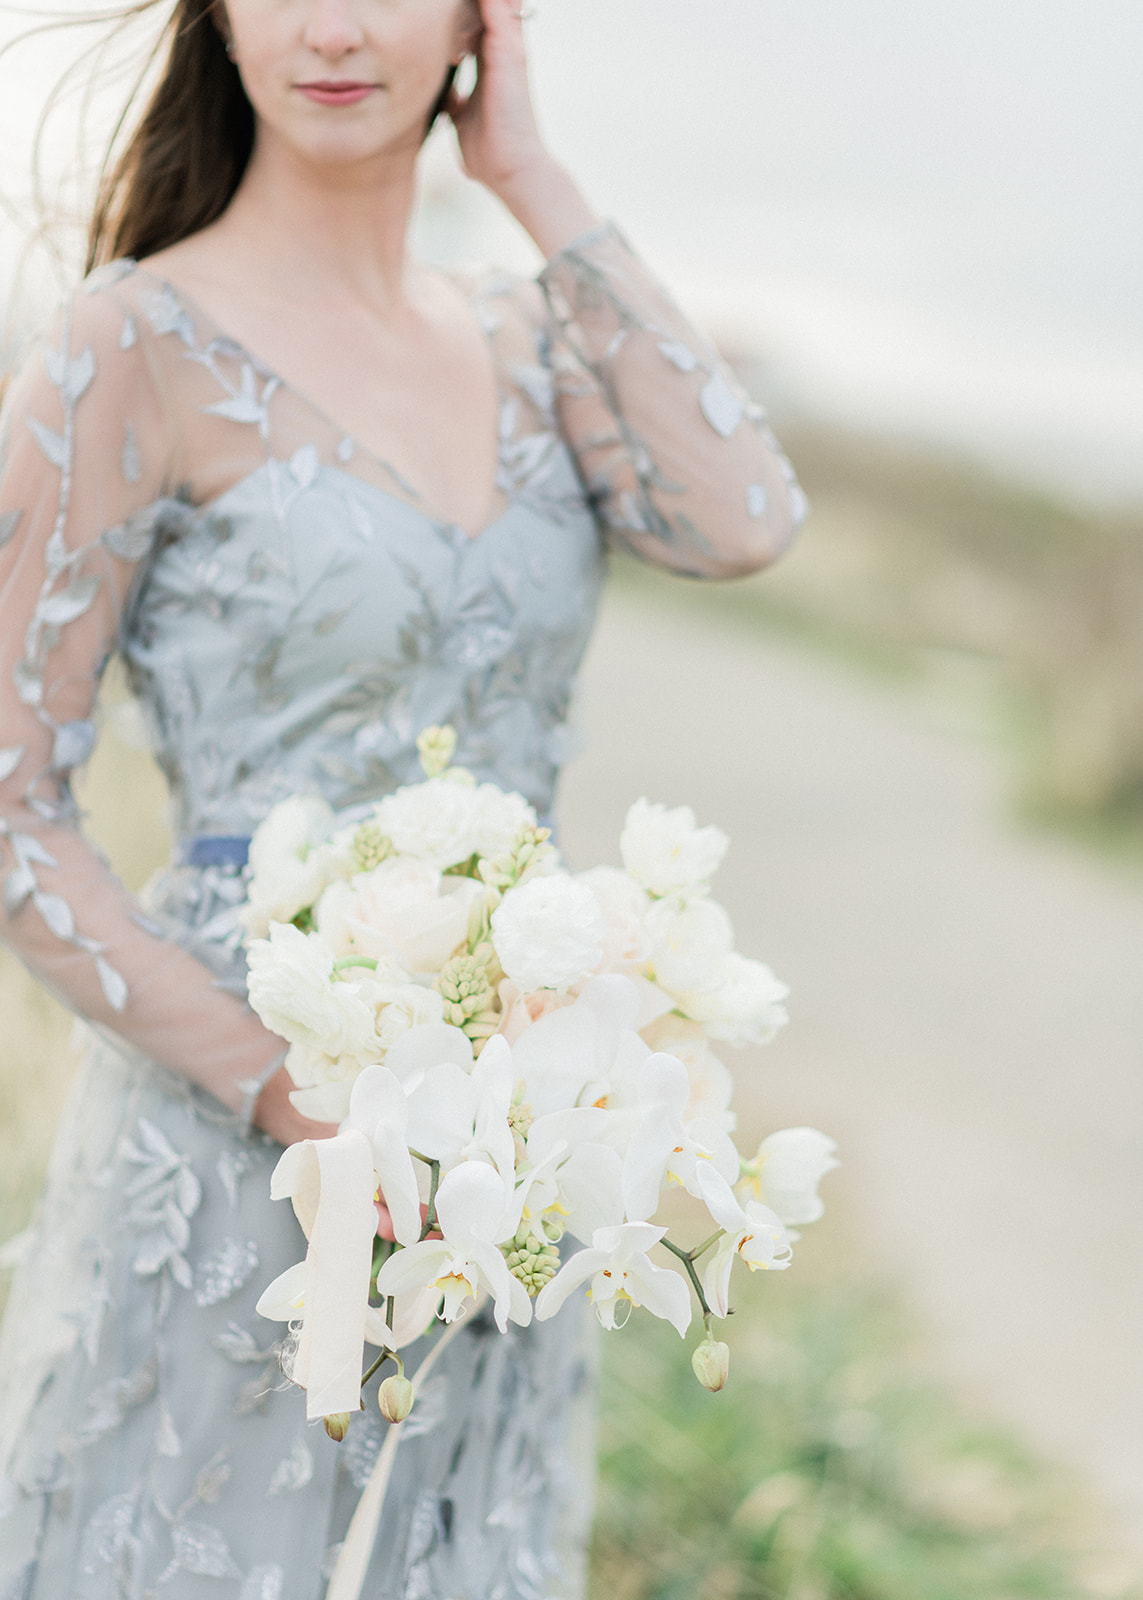 Bride standing with bouquet